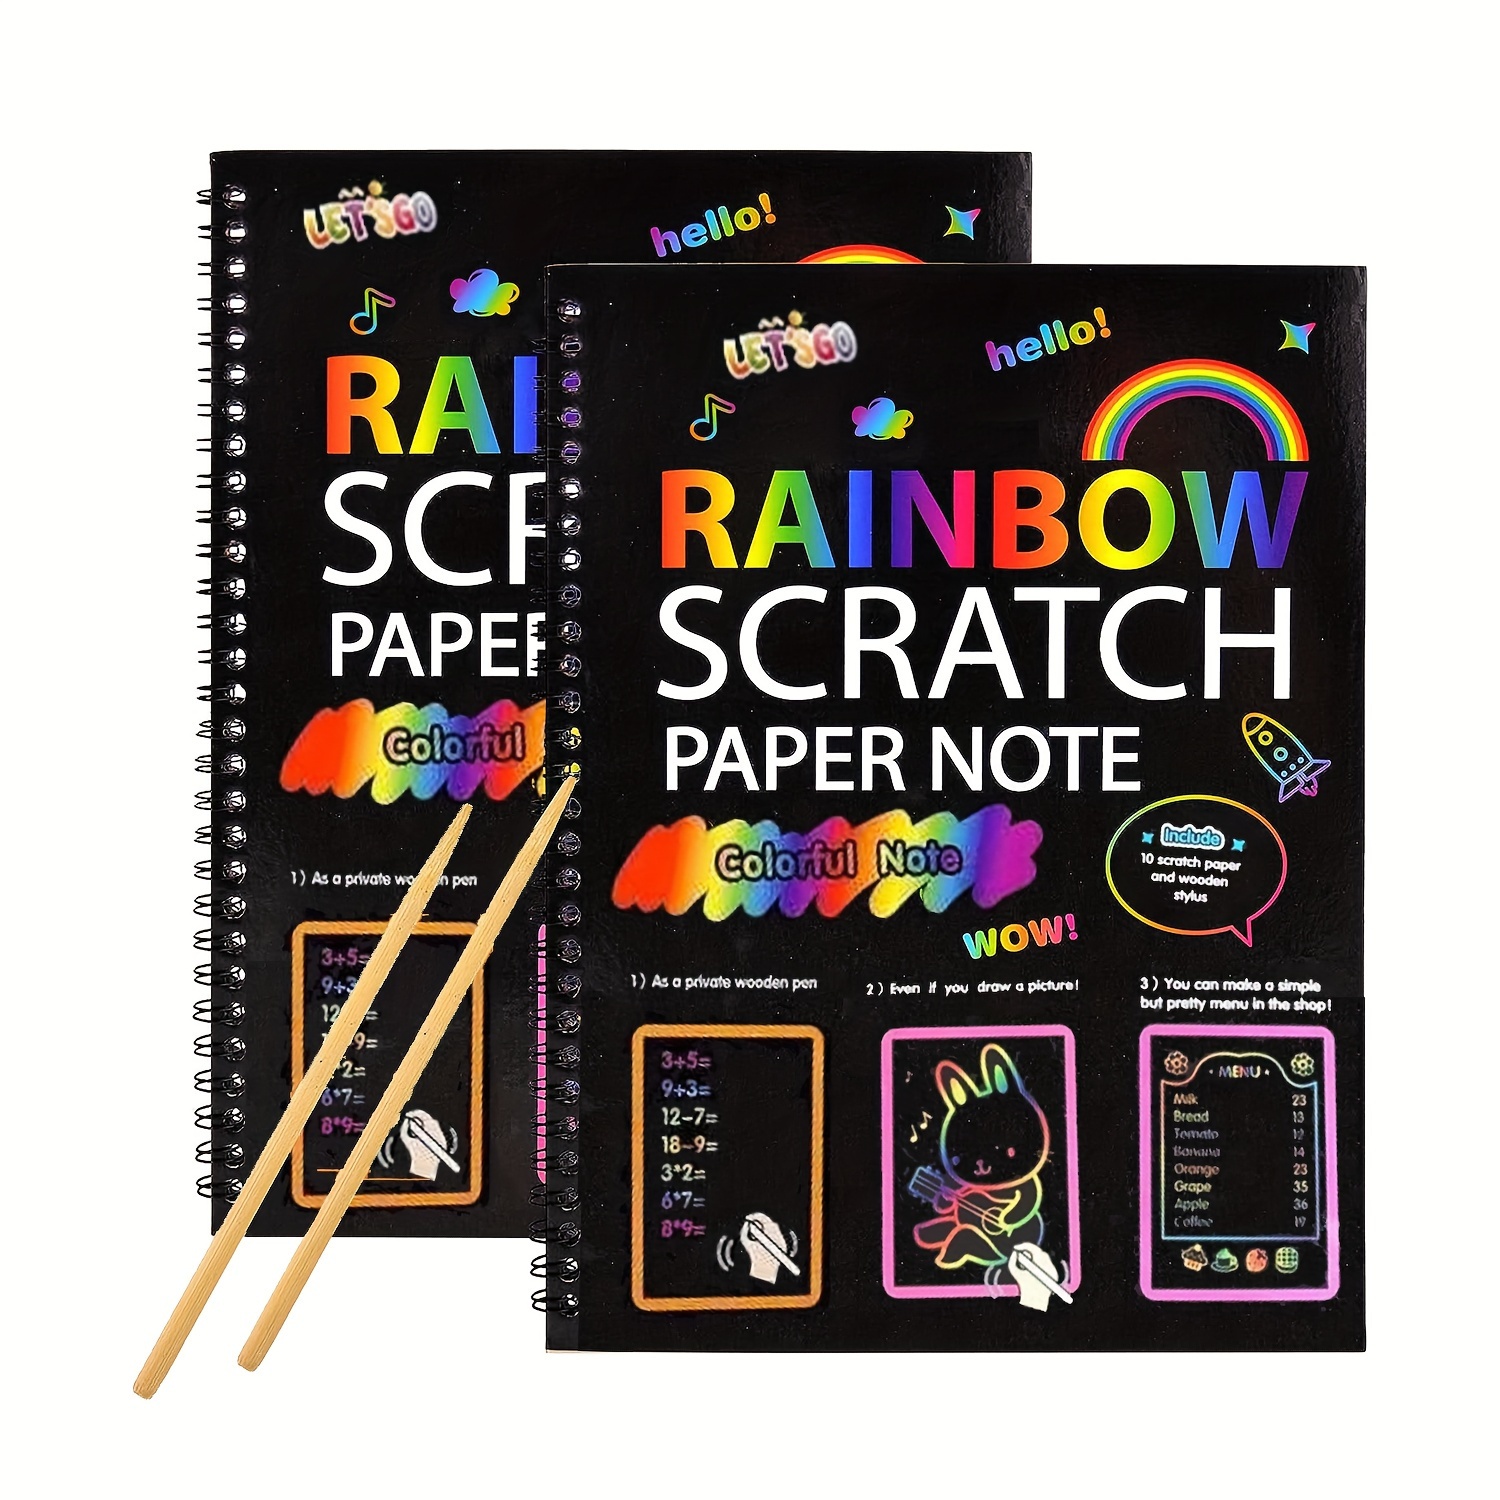 

Scratch Paper Art Set, Rainbow Magic Scratch Paper For Kids Black Scratch It Off Art Crafts Kits With Wooden Stylus For Girl Boy Halloween Christmas Birthday Gift, Party Favor Game Project Kit